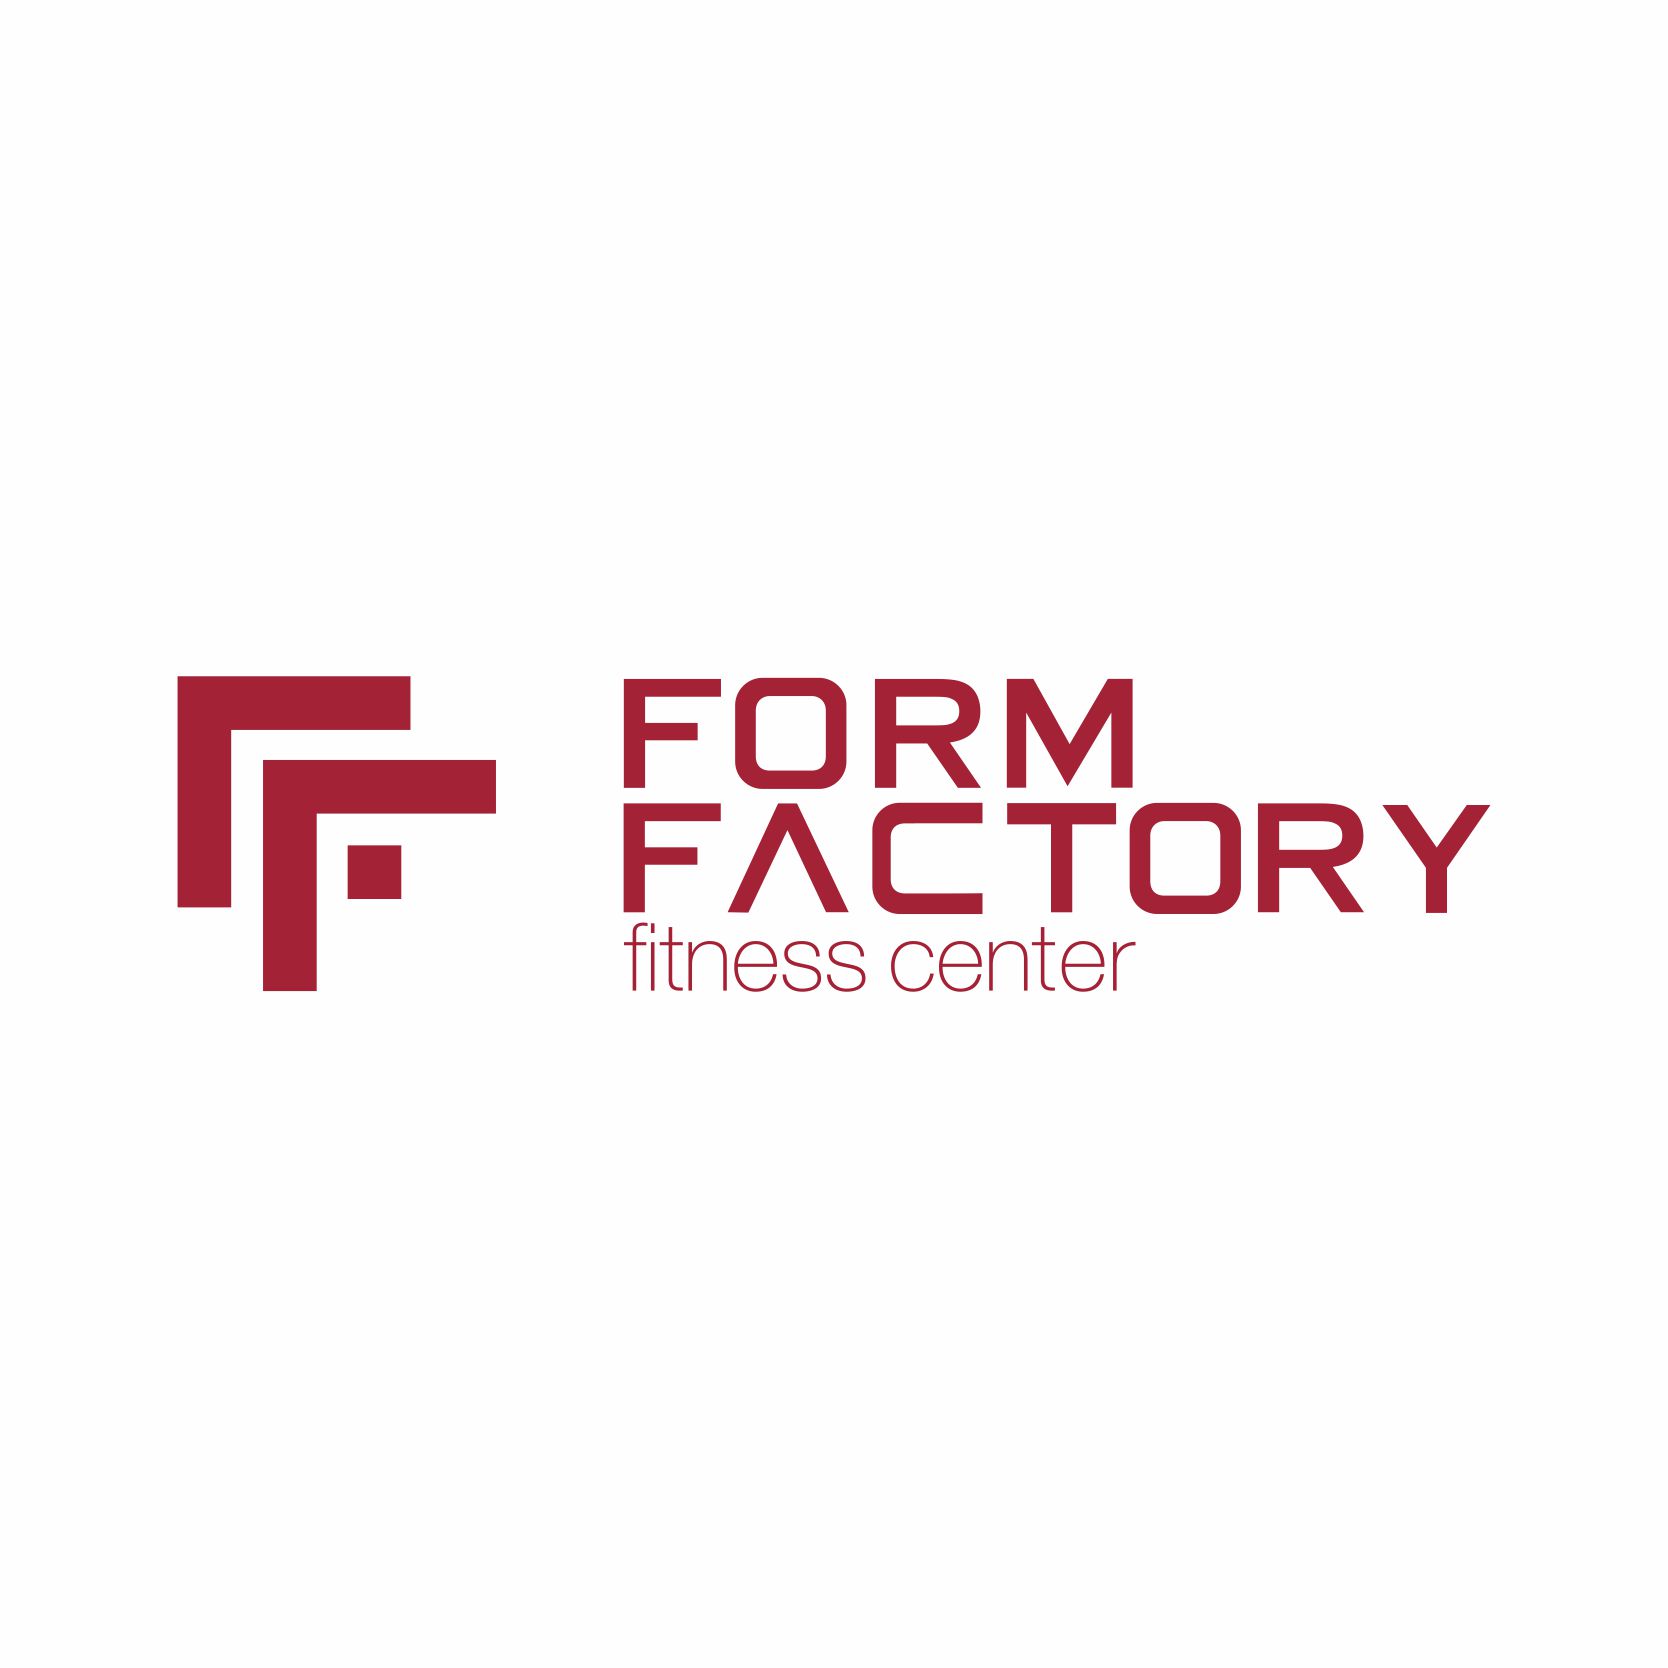 FORM FACTORY